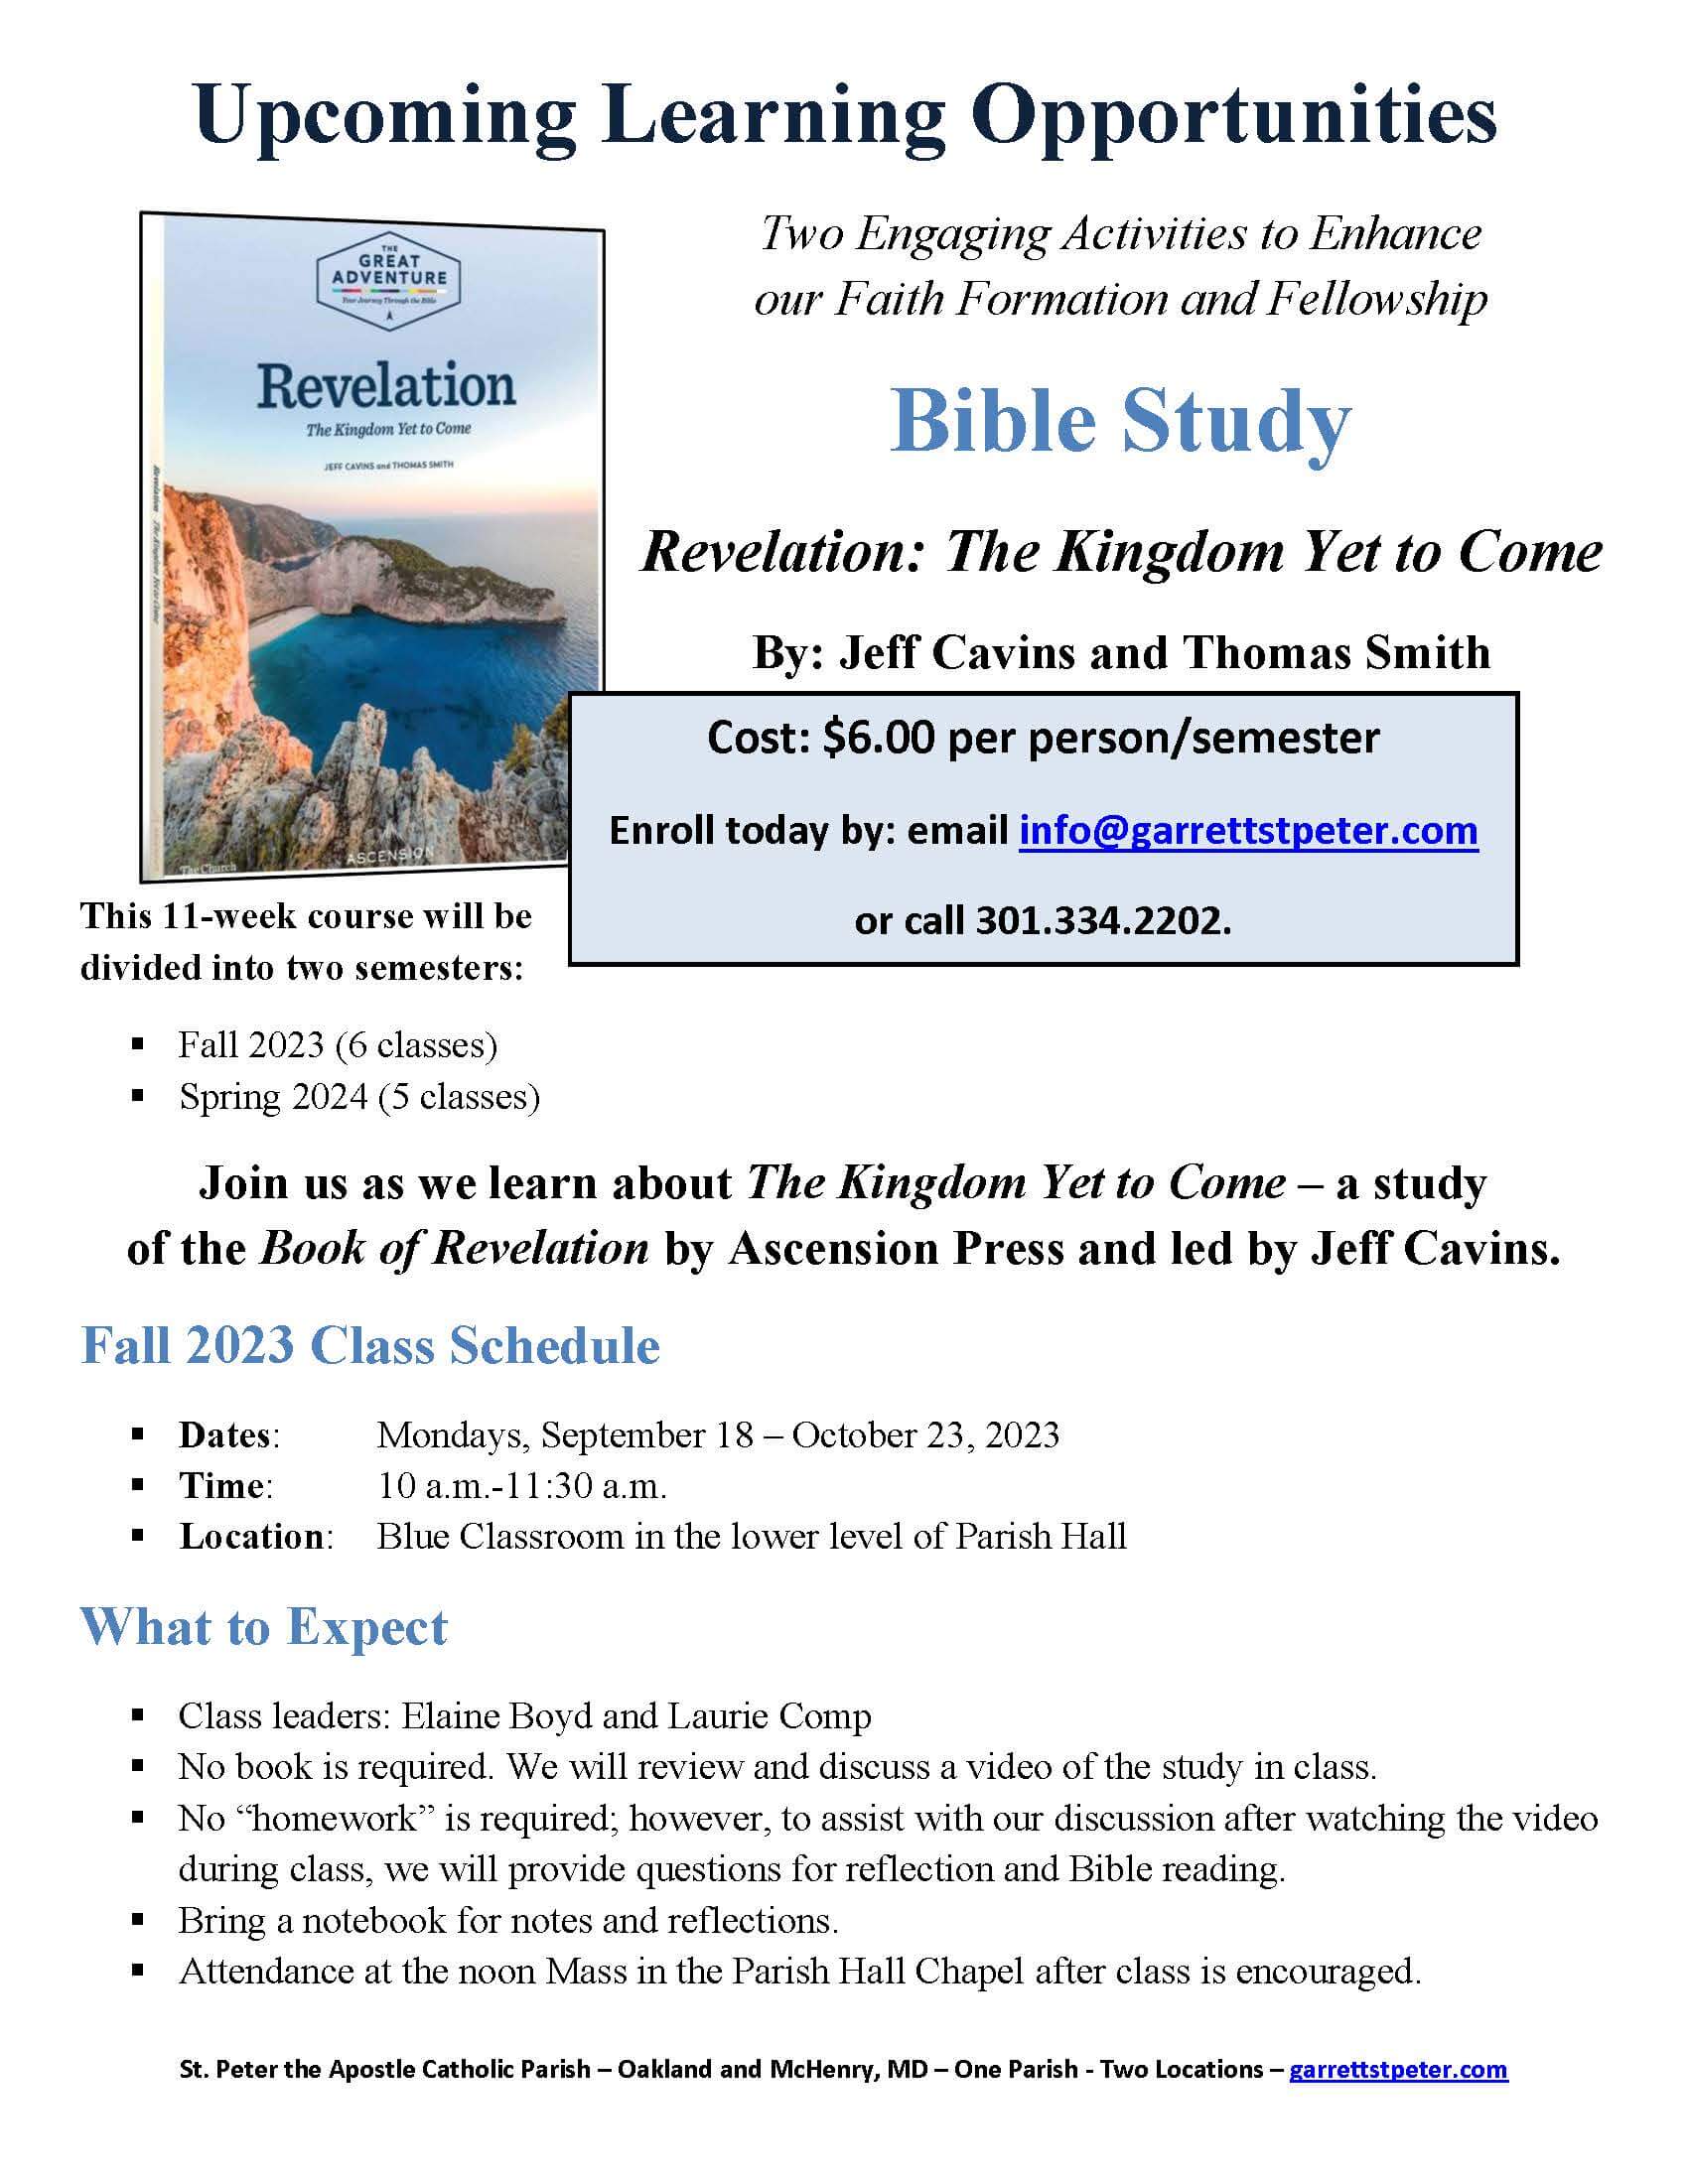 Bible Study: Revelation - The Kingdom Yet to Come at Deep Creek Lake, MD